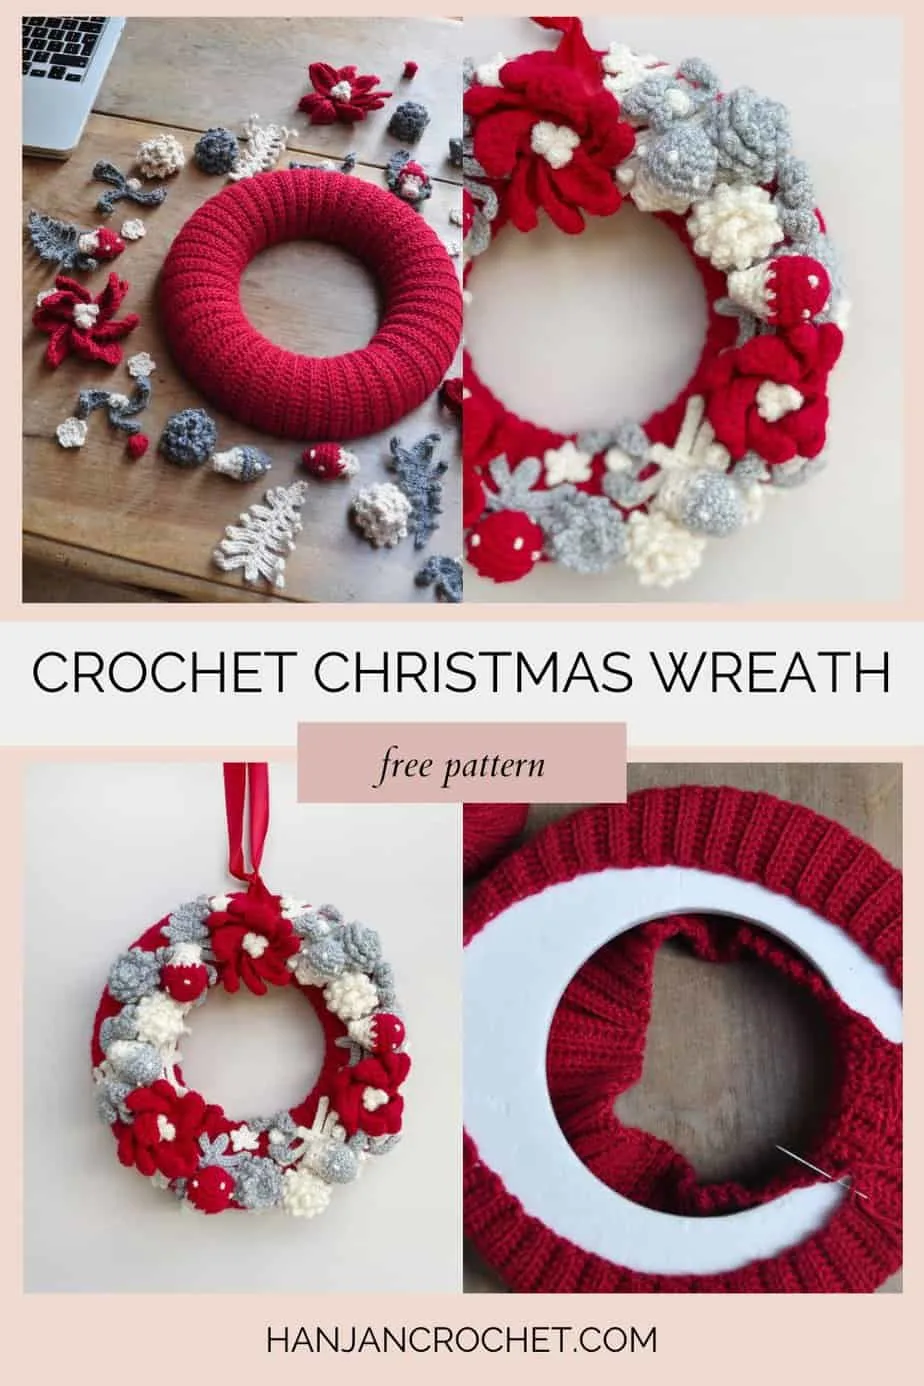 Four images showing how to crochet a wreath cover.